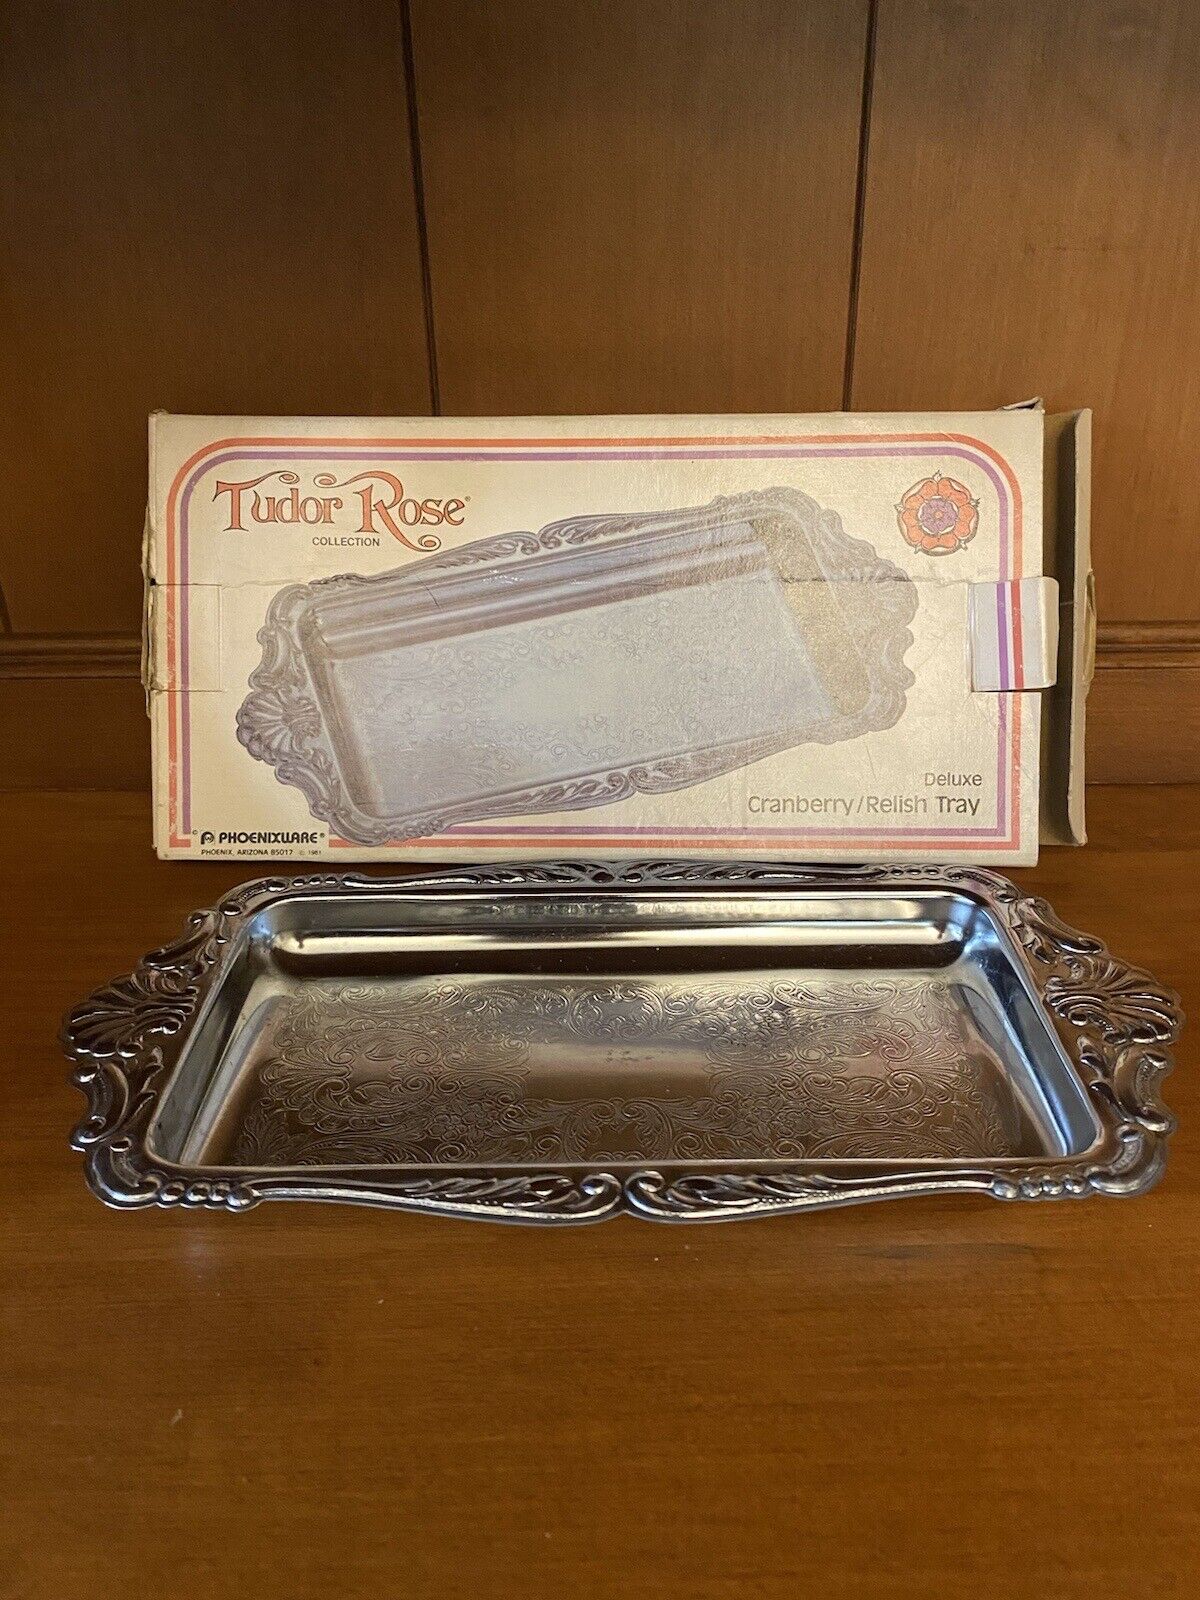 New Vintage Tudor Rose Deluxe Cranberry Relish Tray Phoenixware Made in USA 3121